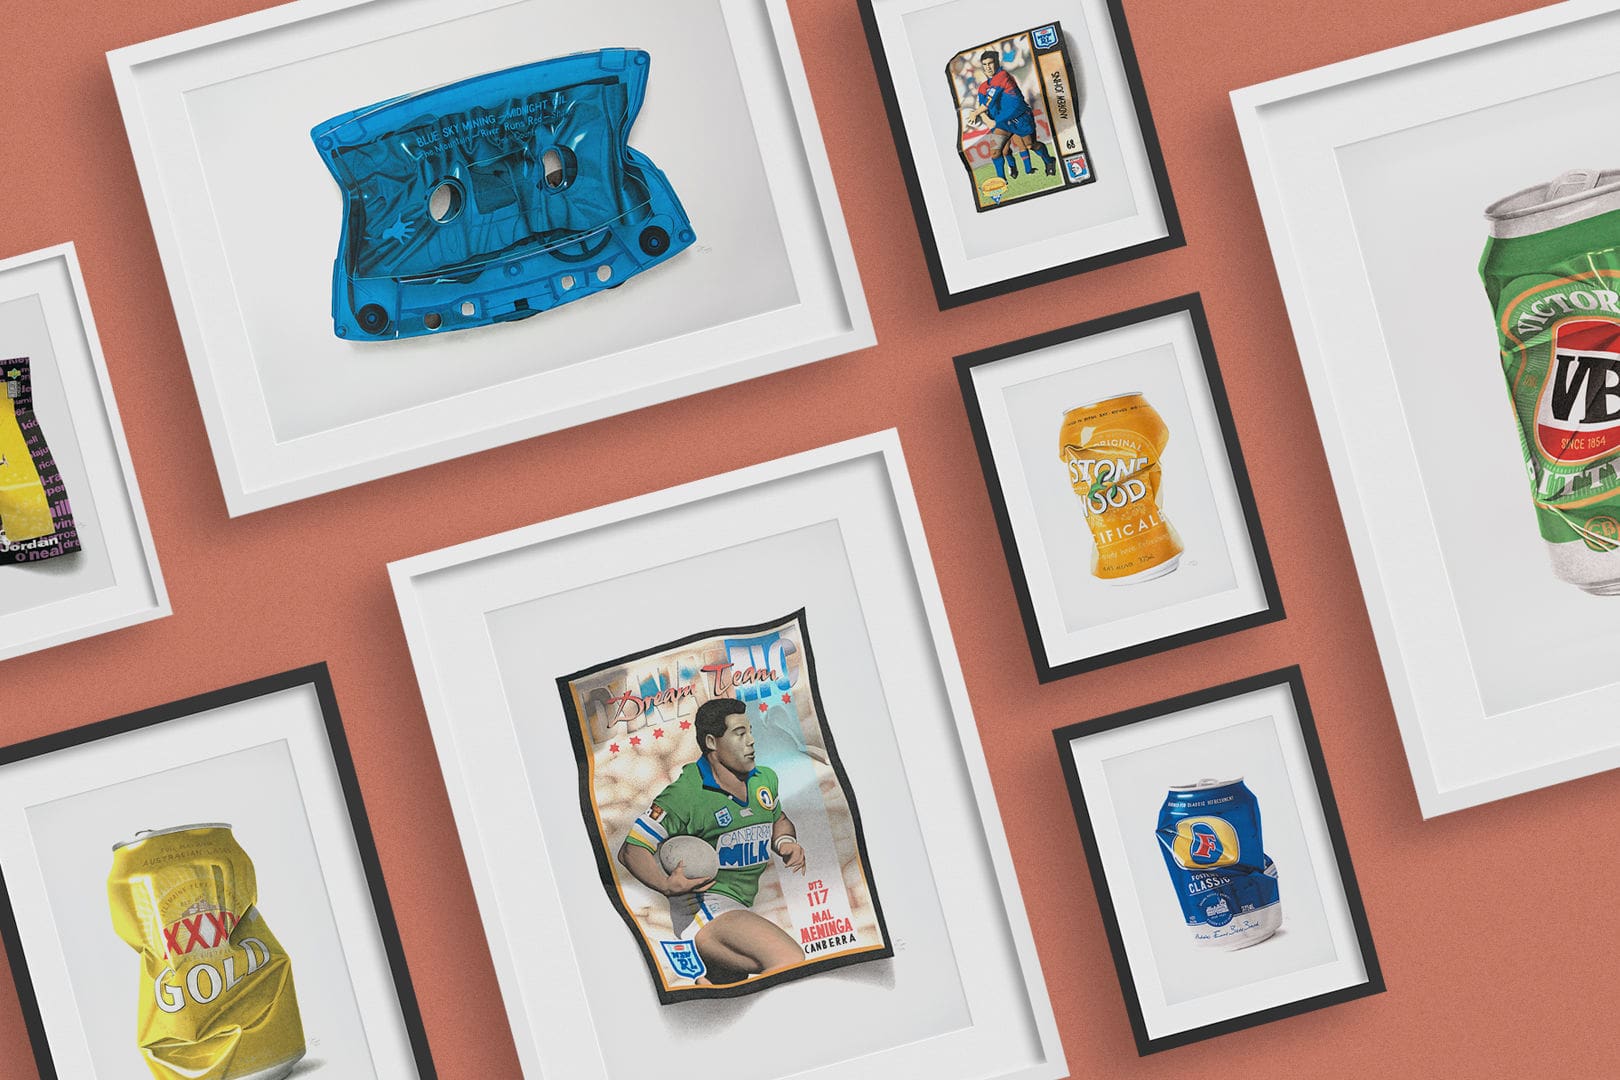 Father's Day Gift Guide - Artwork featuring Mal Meninga NRL card, VB can, XXXX can, Michael Jordan card, Midnight Oil artwork